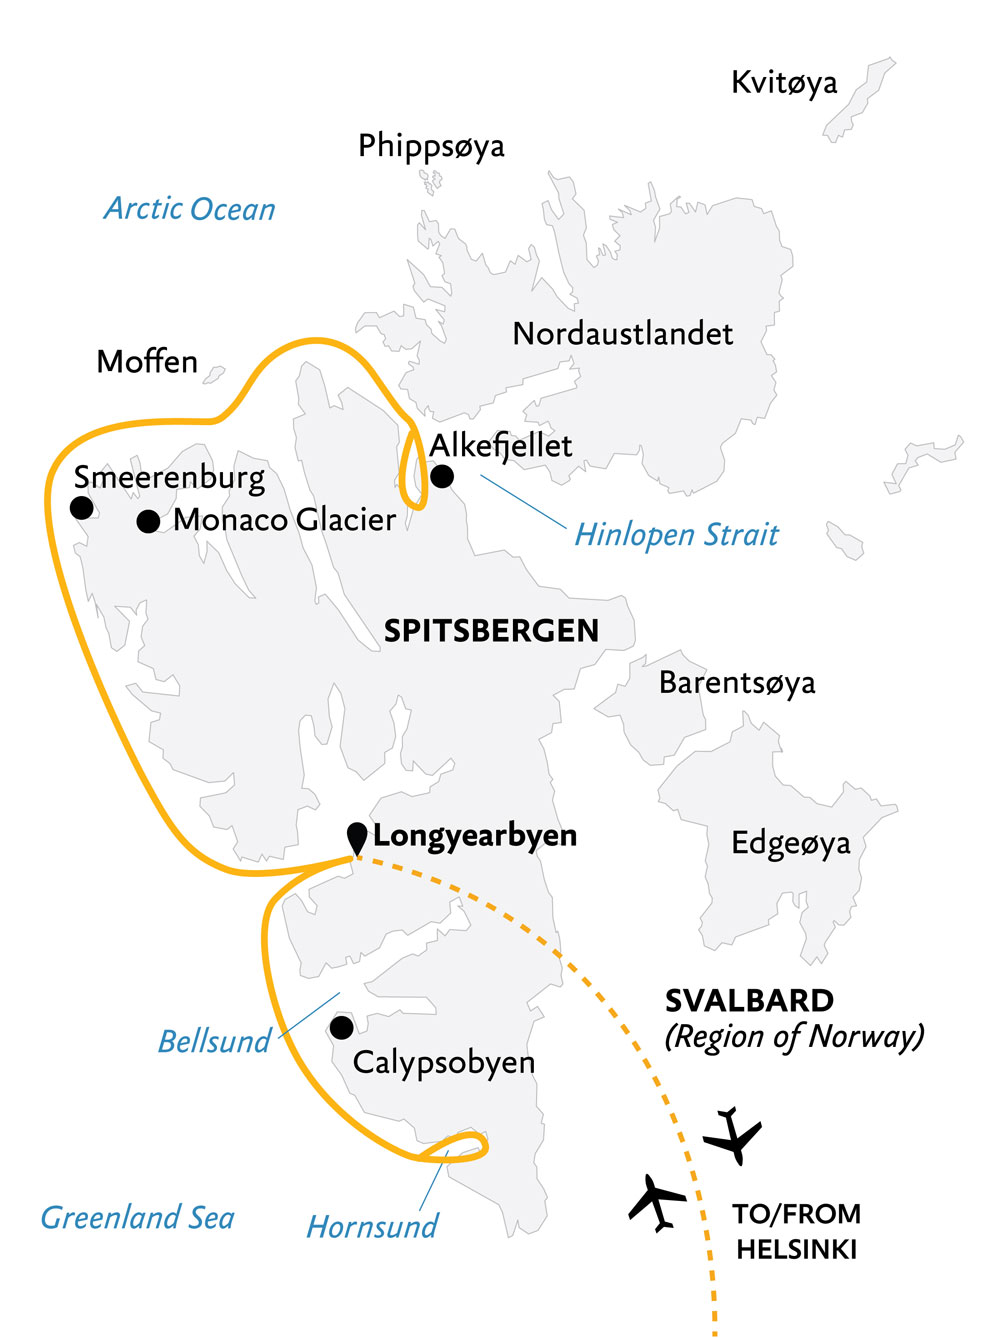 Route map of Svalbard Explorer cruise focused on western edge of the archipelago & operating round-trip from Longyearbyen with bookend flights to and from Helsinki, Finland.